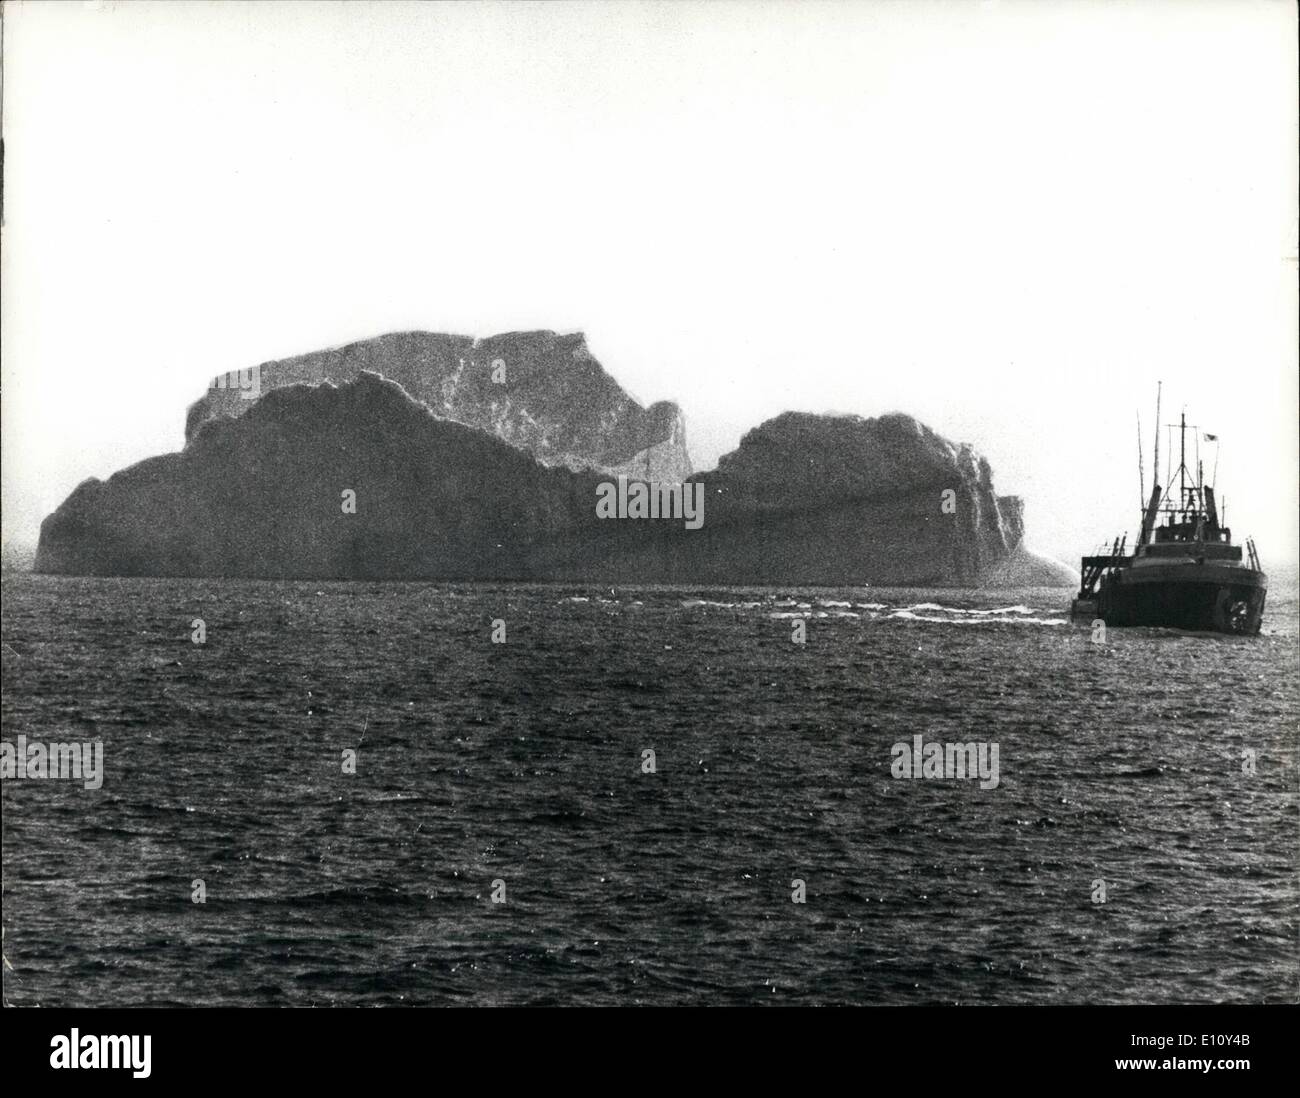 Aug. 08, 1974 - Towing away an iceberg. The scene as the motor vessel Hudson service tows away an iceberg from as area off the Newfoundland coast where British petroleum' s rig. Haydrill, is drilling for oil. Some of the iceberg up to 10 millions town. Stock Photo